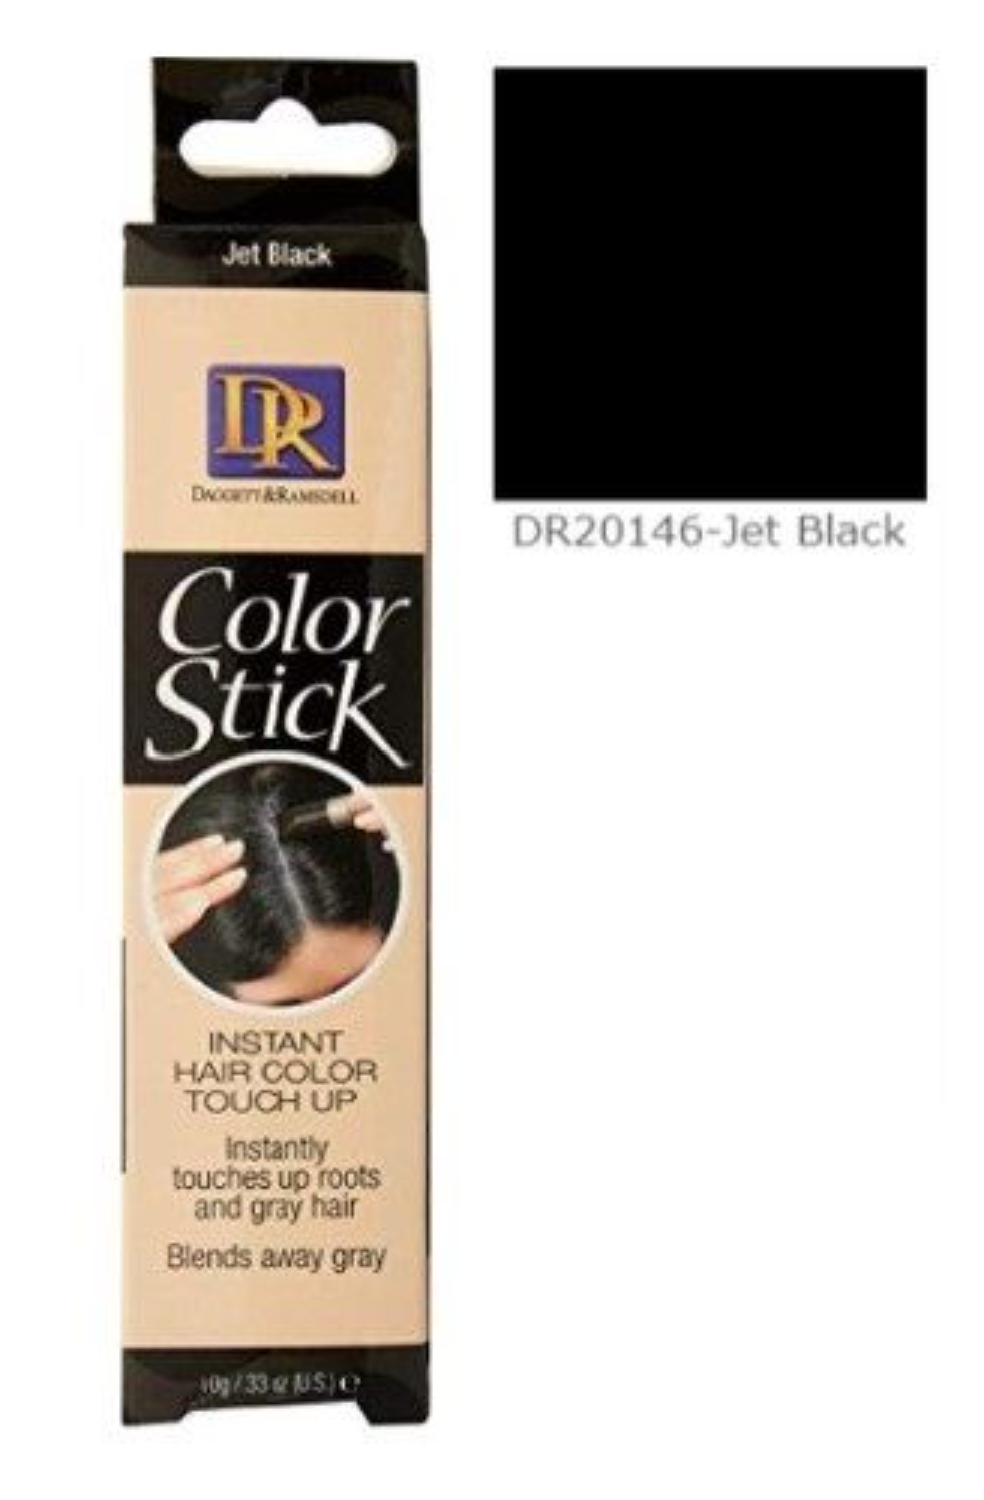 DAGGETT &amp; RAMSDELL COLOR STICK INSTANT HAIR COLOR TOUCH-UP DARK BROWN 0.44 oz